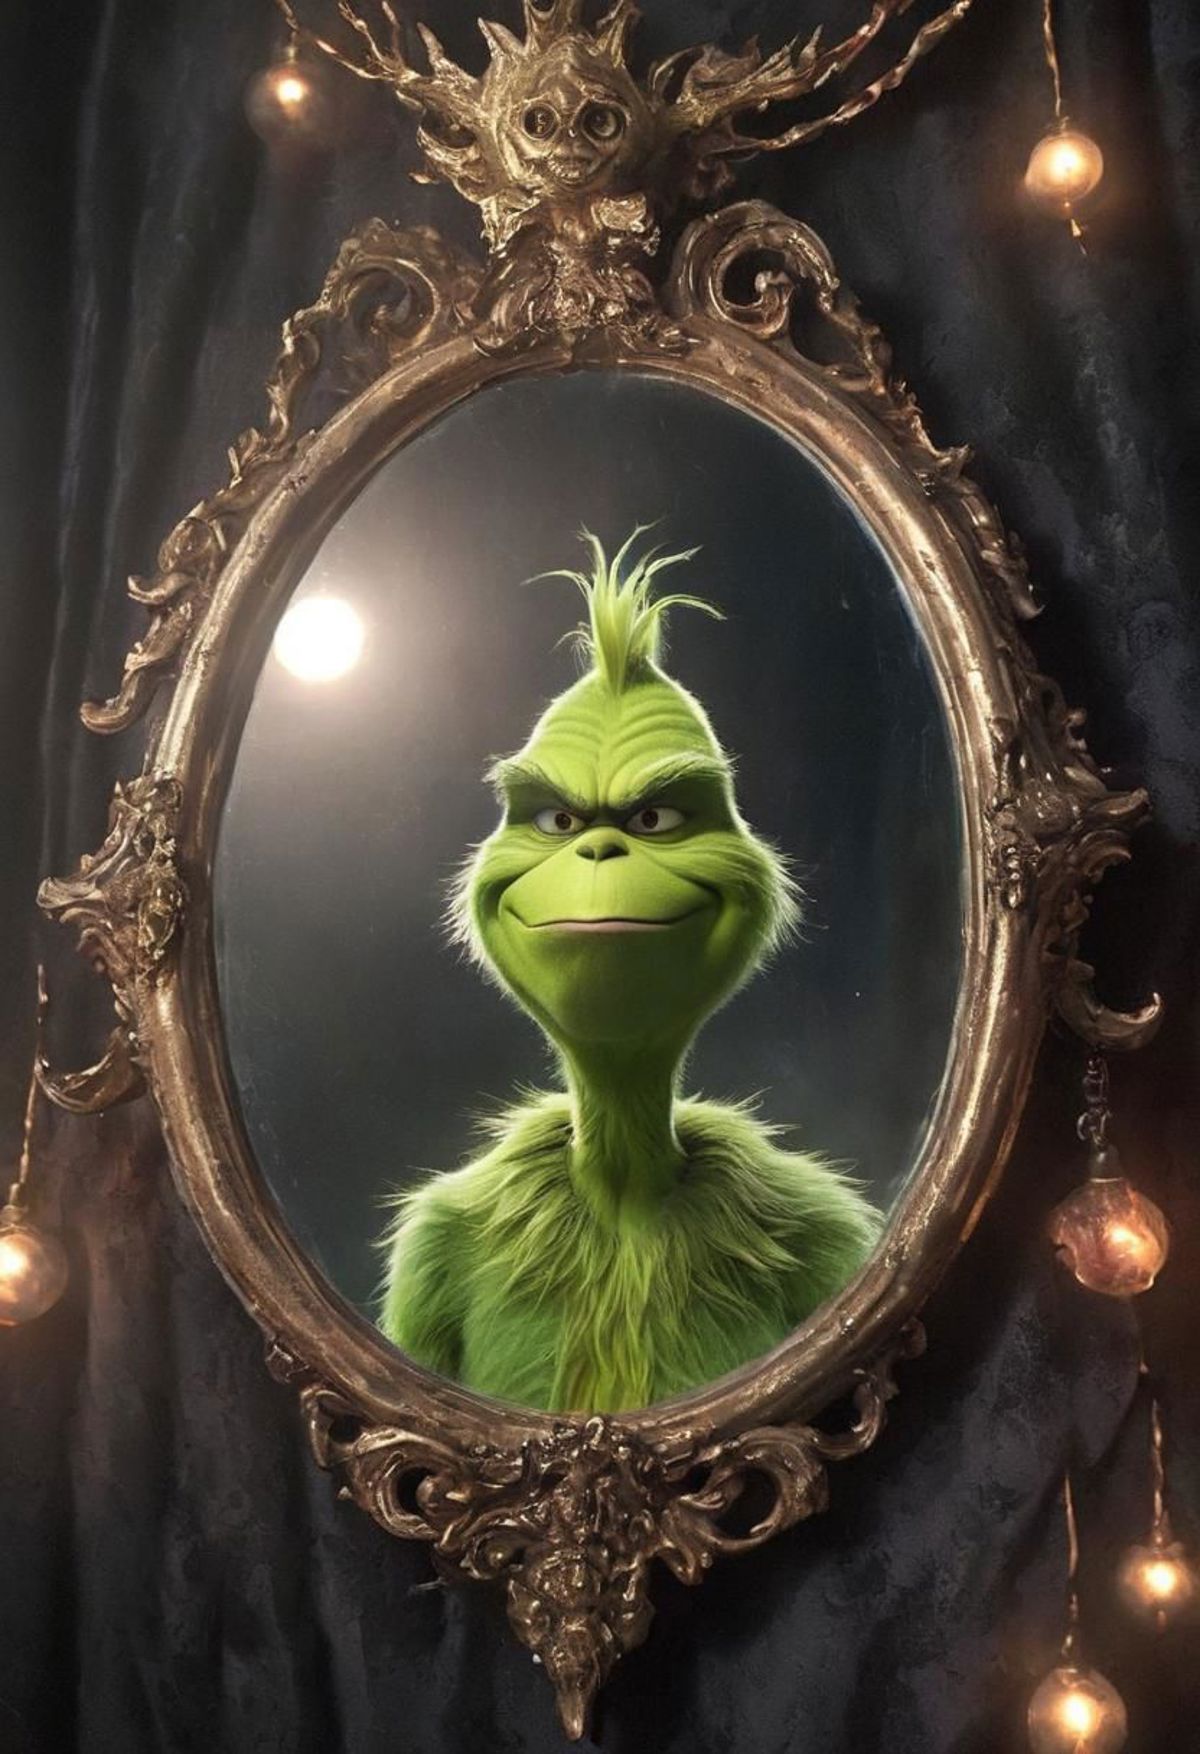 A green Grinch character is reflected in a mirror.